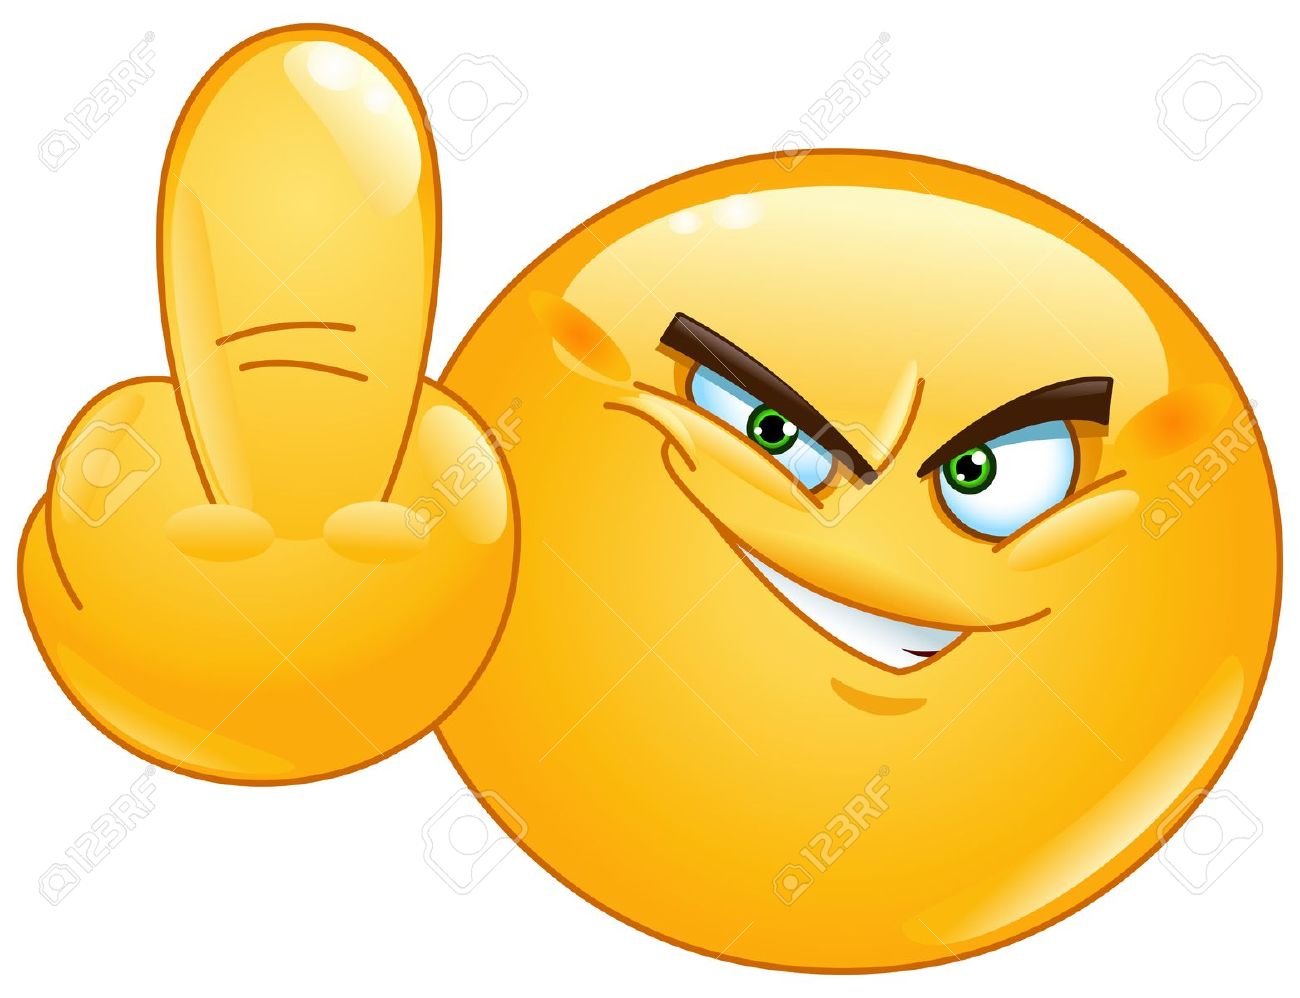 17831663-Emoticon-showing-middle-finger-Stock-Photo.jpg